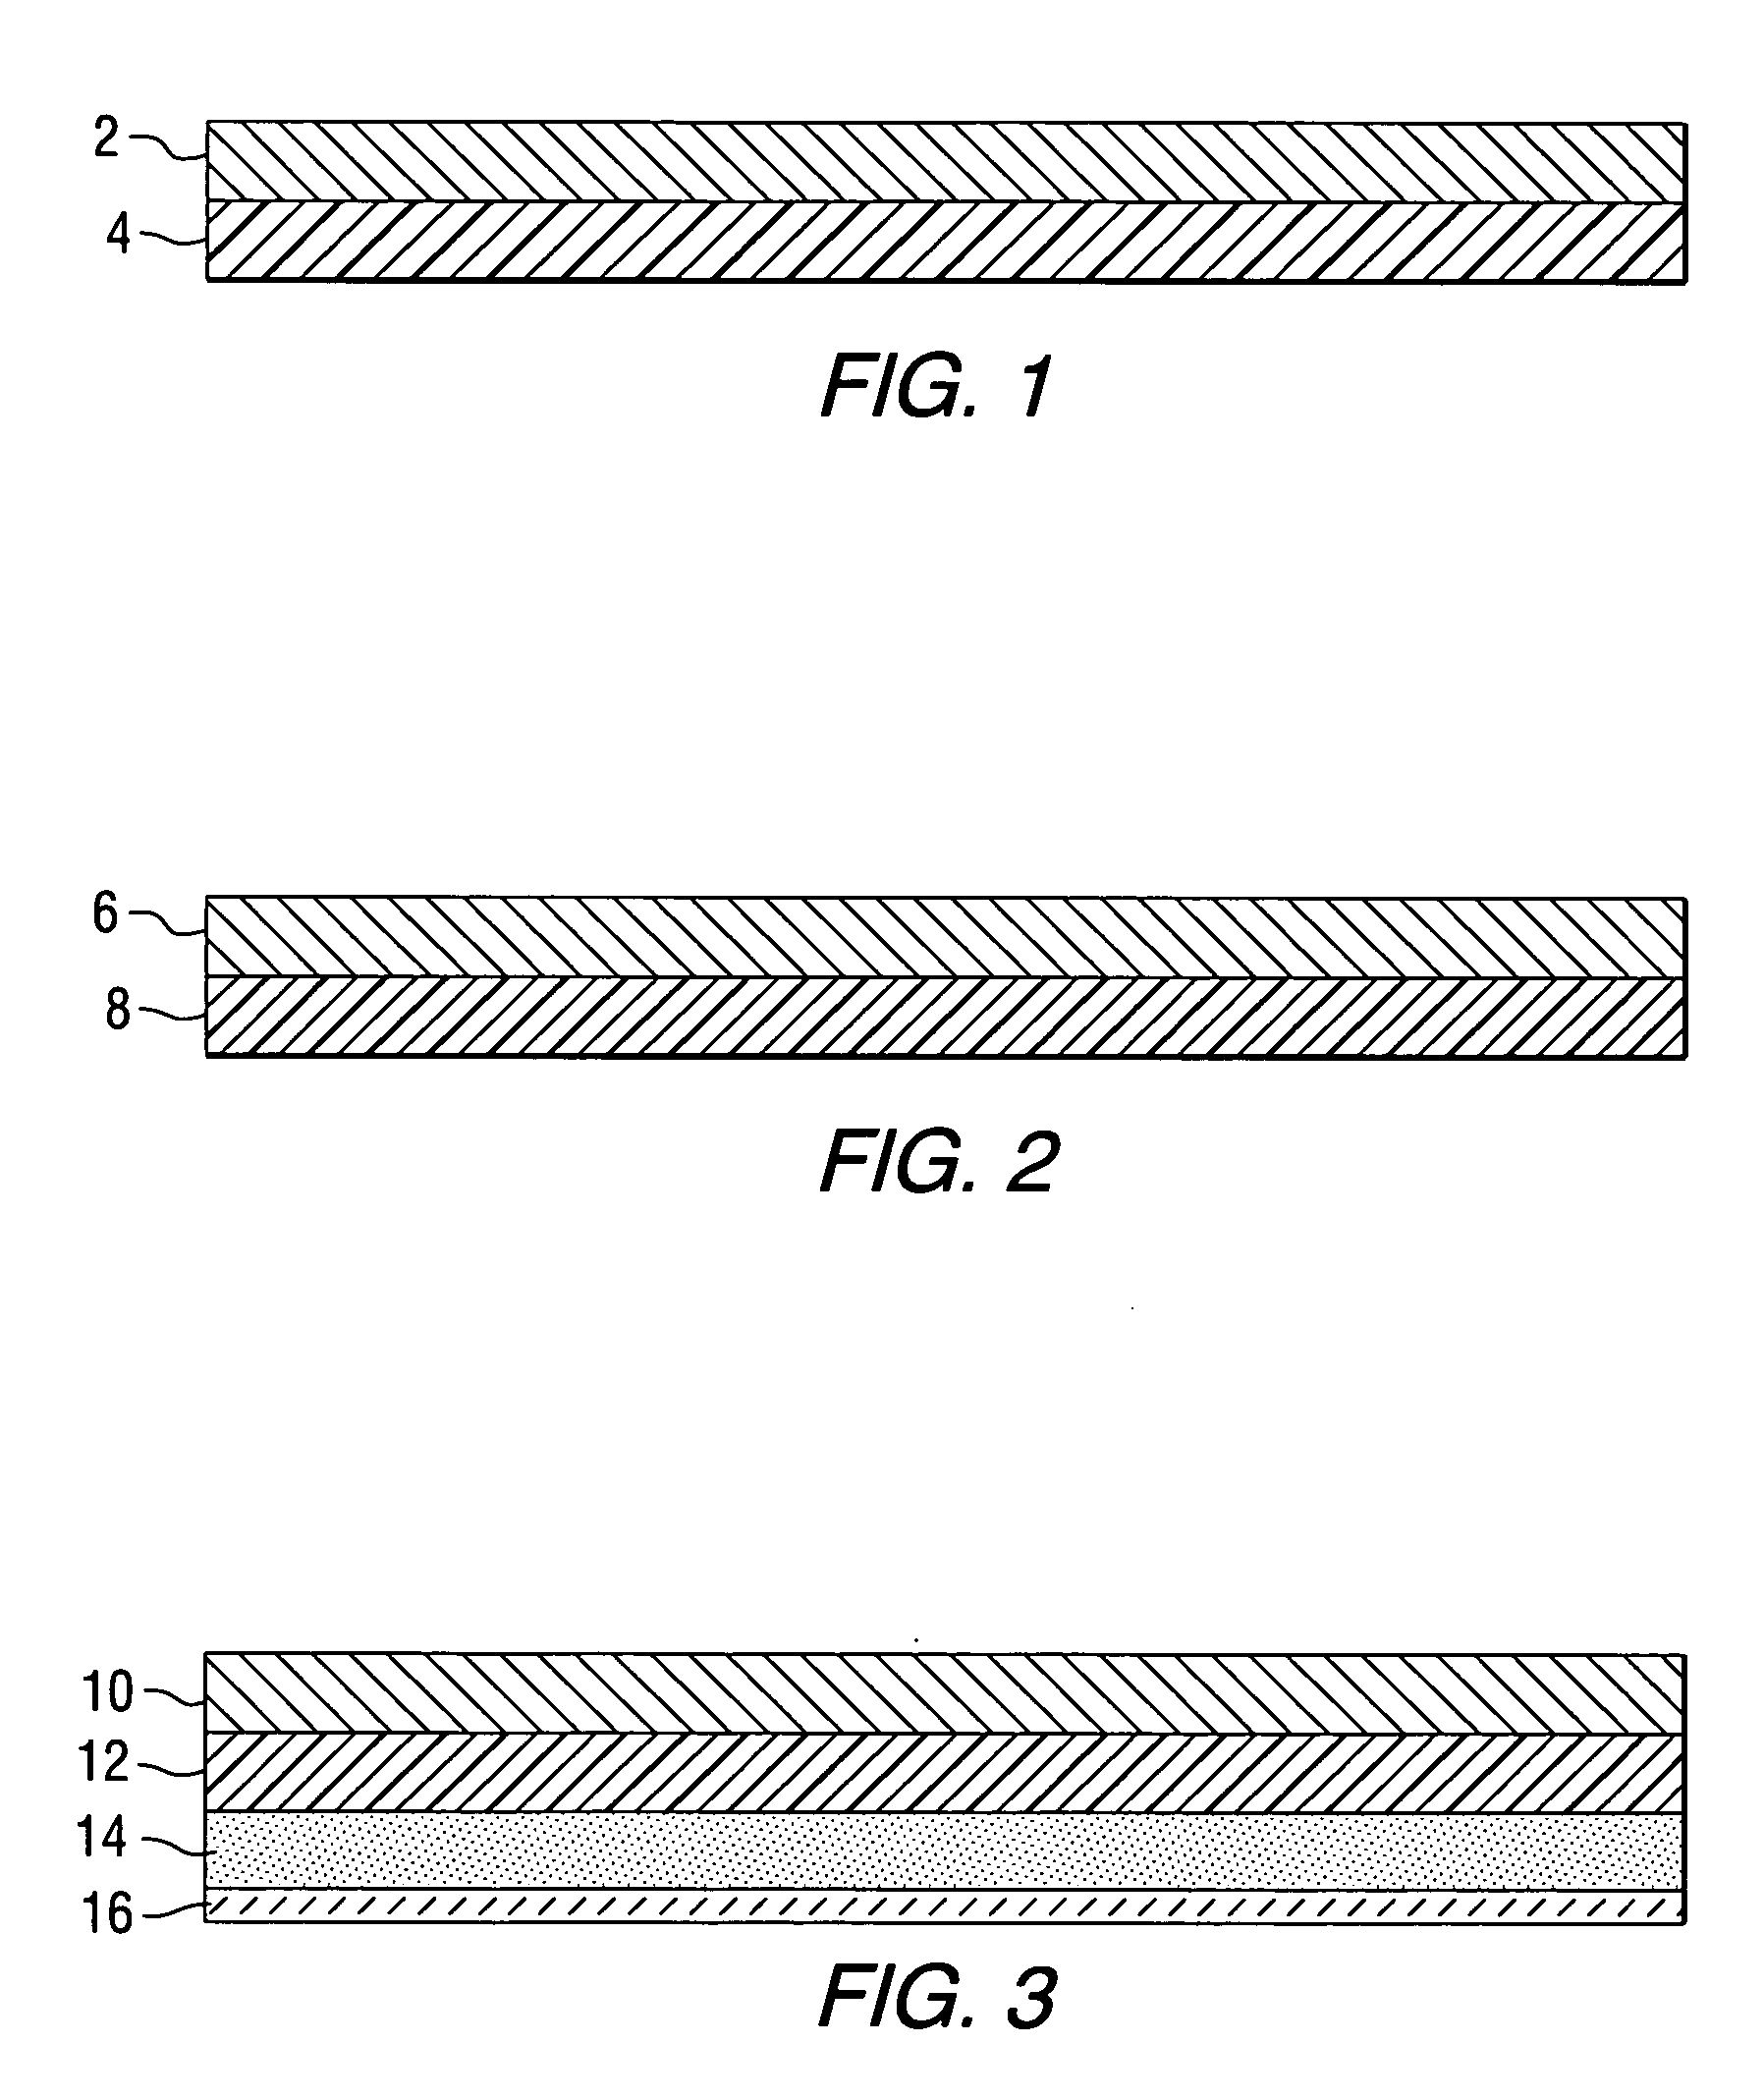 Methods for applying sound dampening and/or aesthetic coatings and articles made thereby